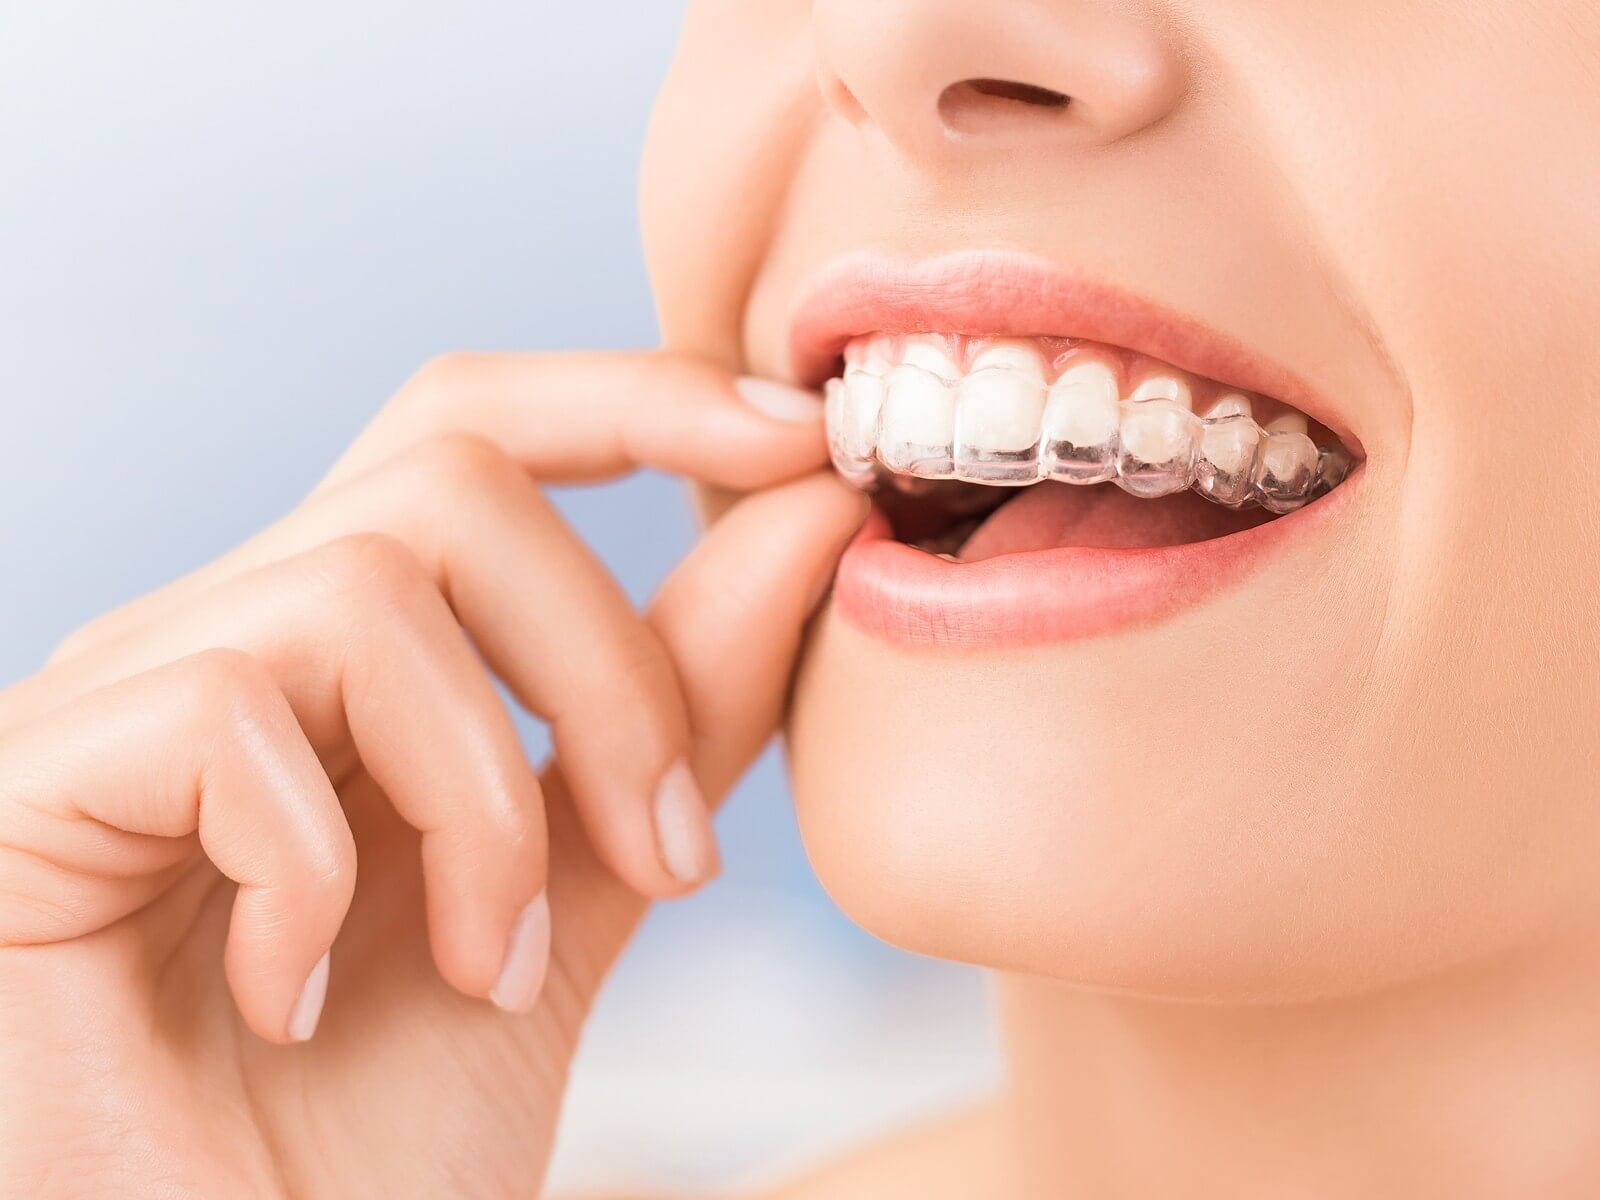 How long do I need to wear a retainer after Invisalign?